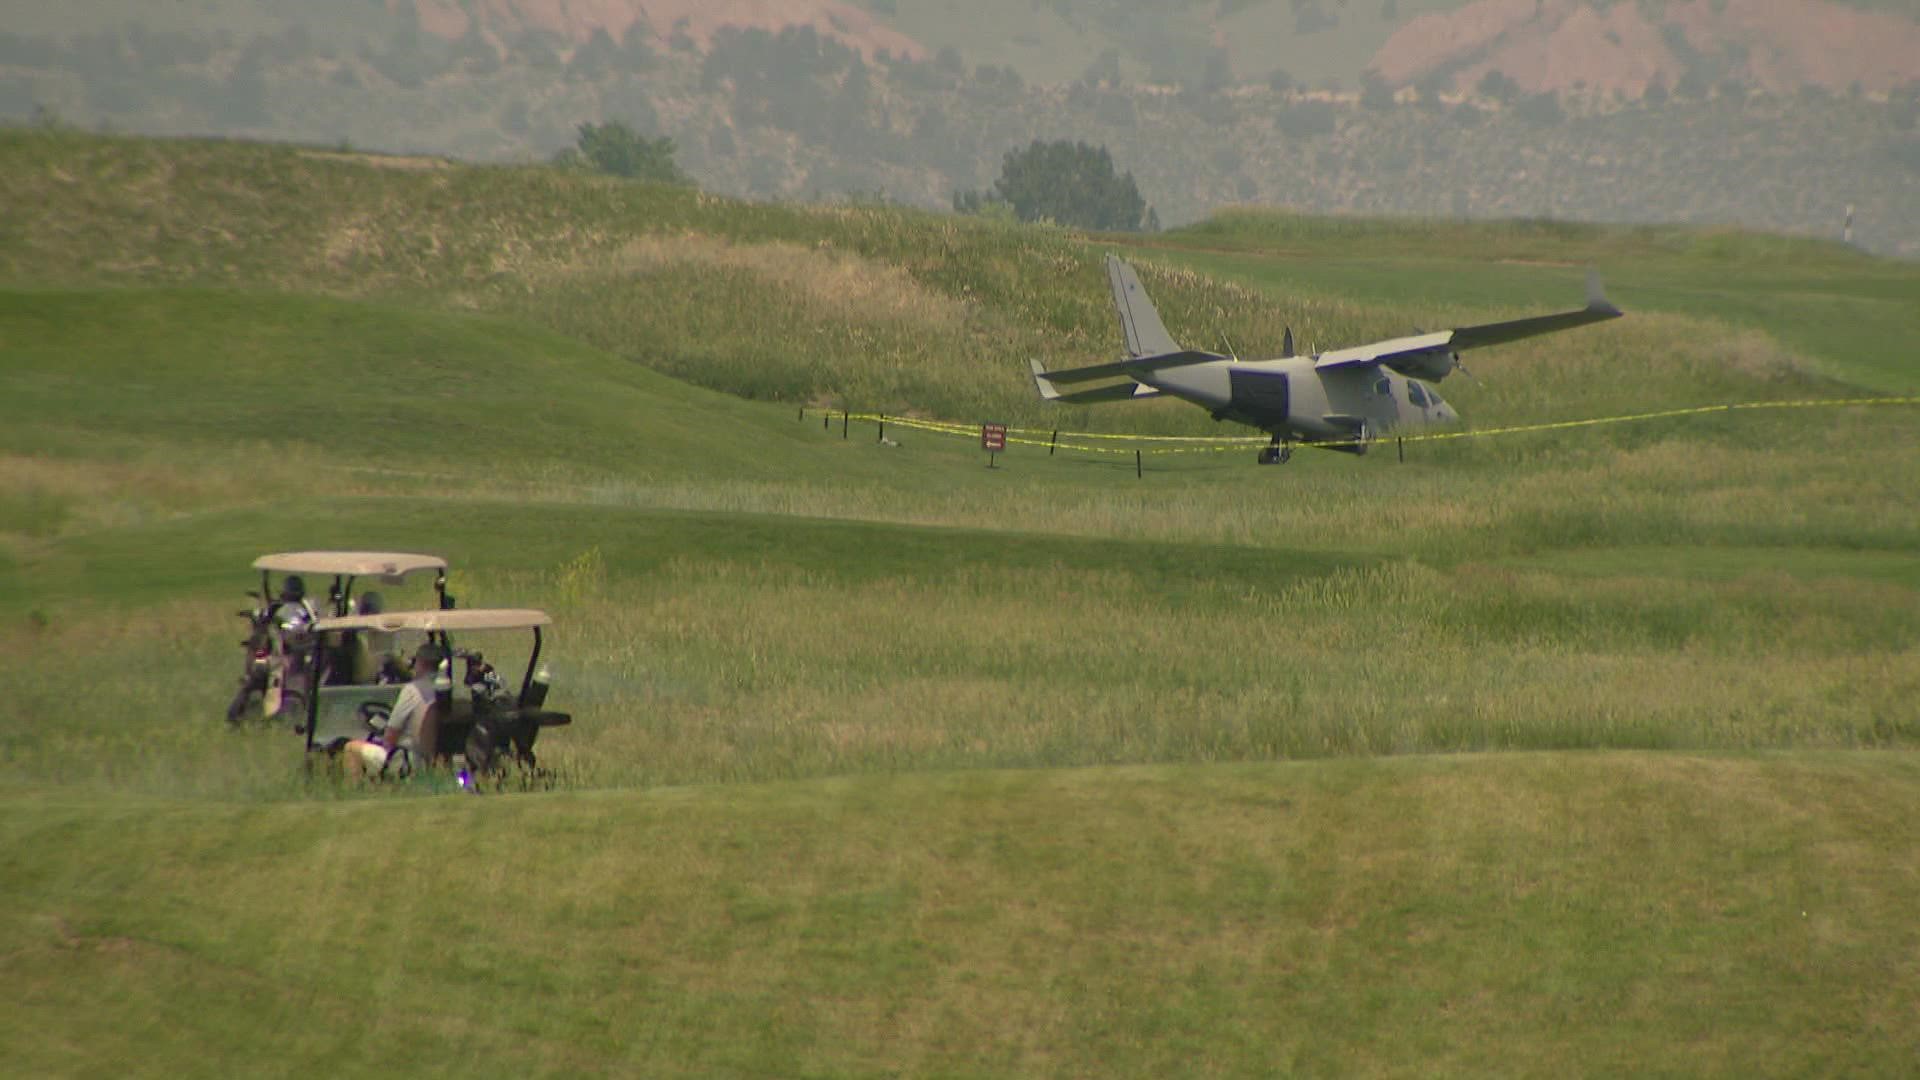 The twin-engine plane carrying two people landed in Fox Hollow Golf Course on Monday. No injuries were reported.